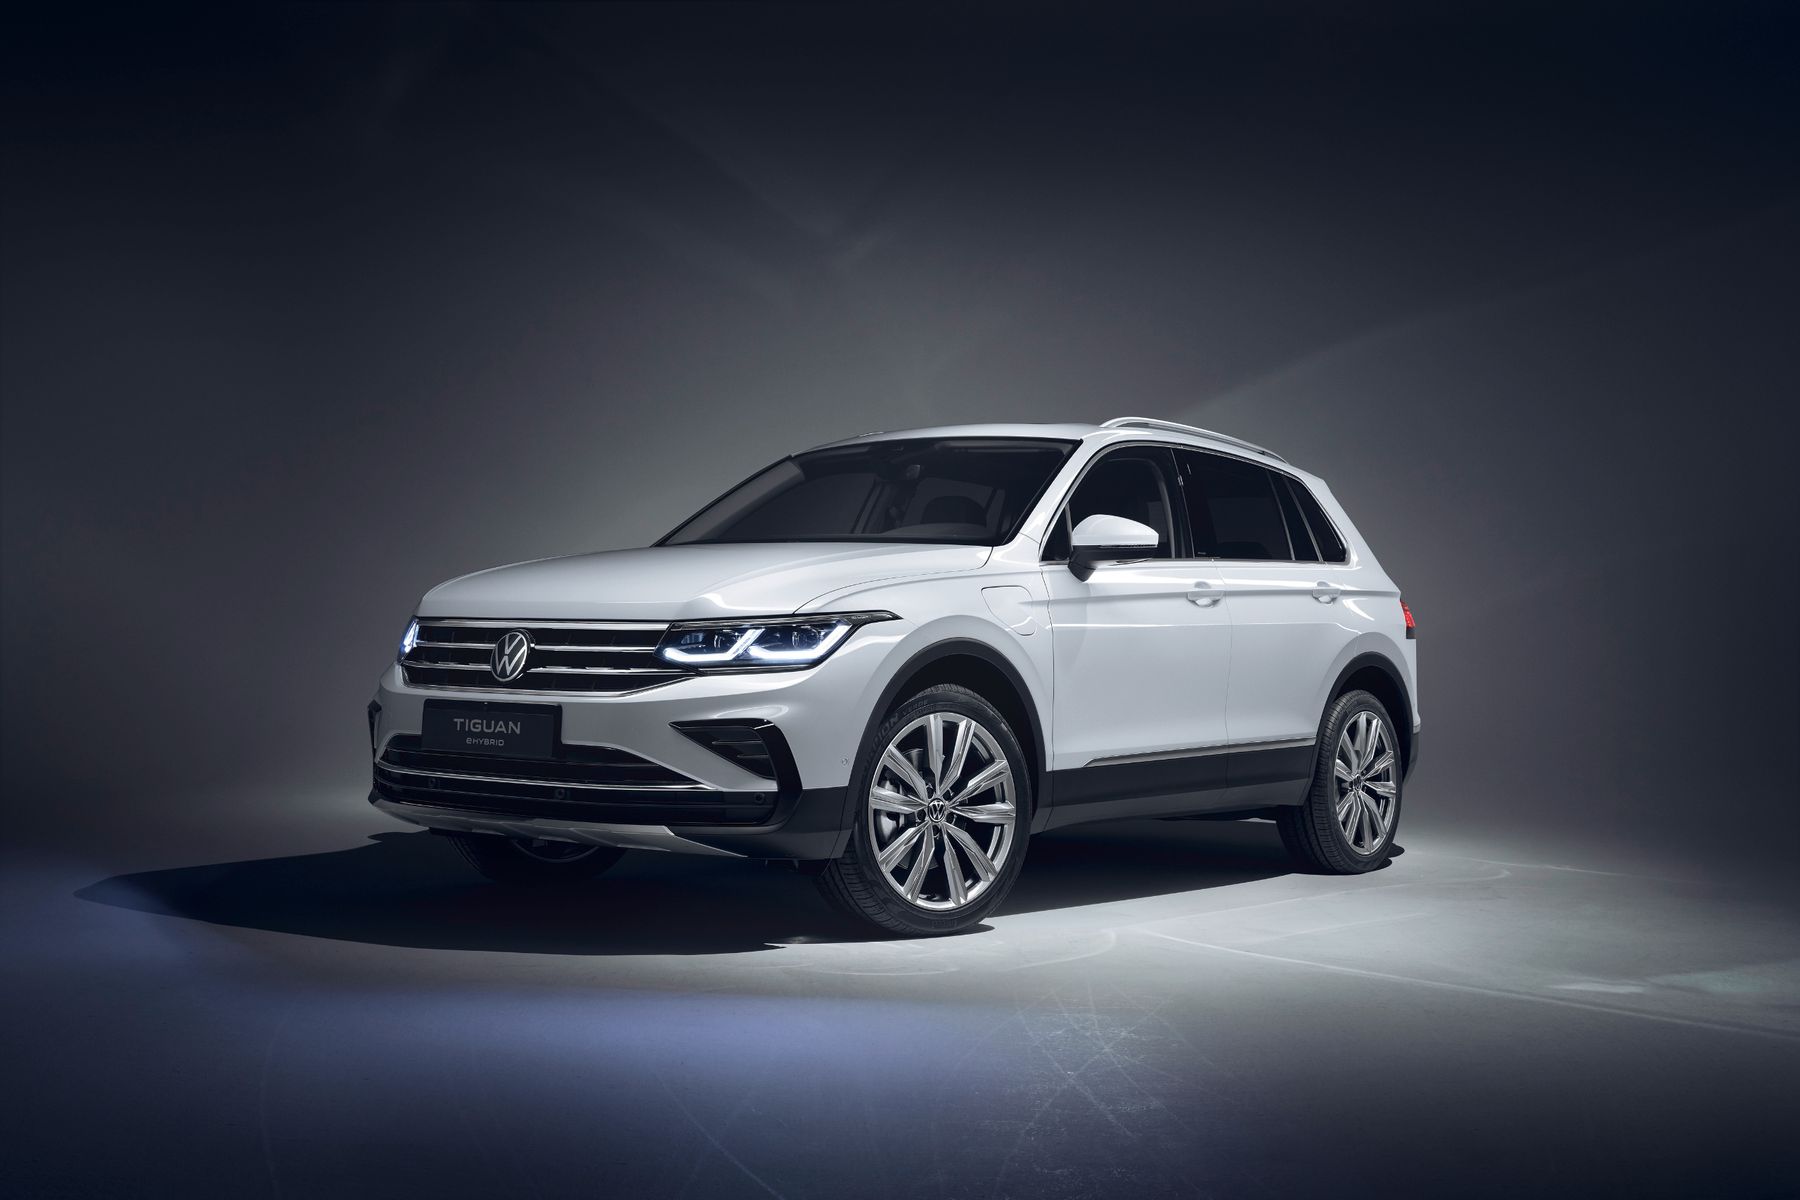 Volkswagen Tiguan crossover. 2nd generation. Produced since 2016